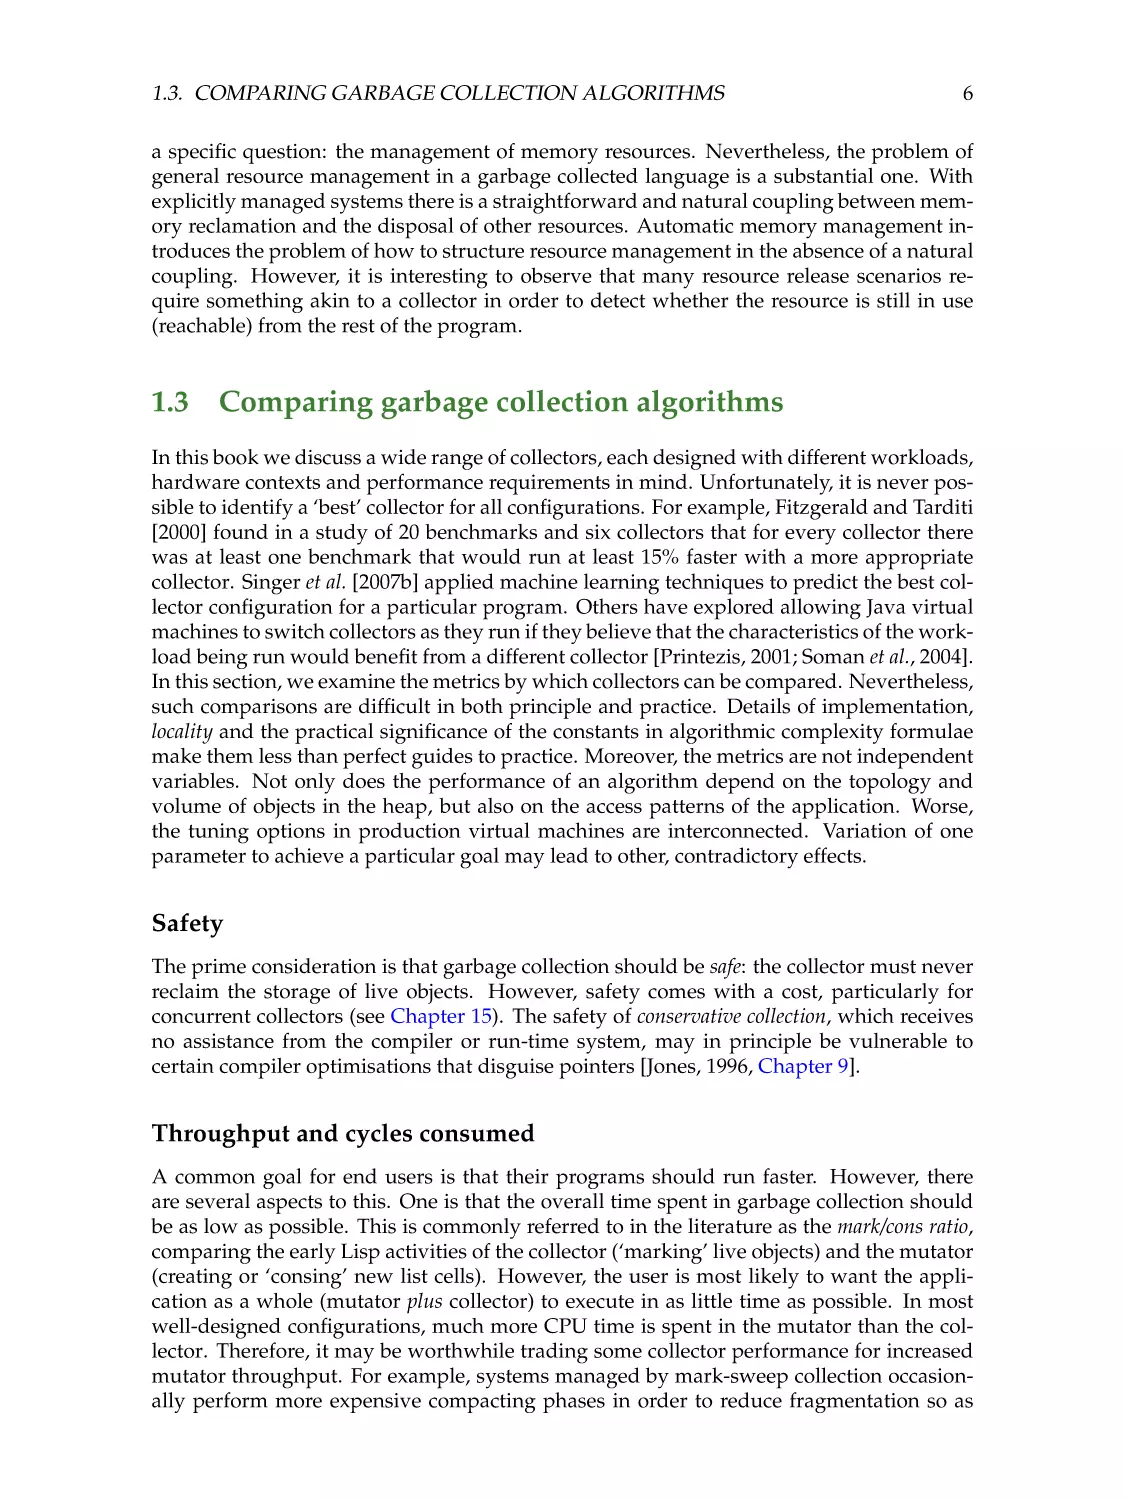 1.3. Comparing garbage collection algorithms
Safety
Throughput and cycles consumed